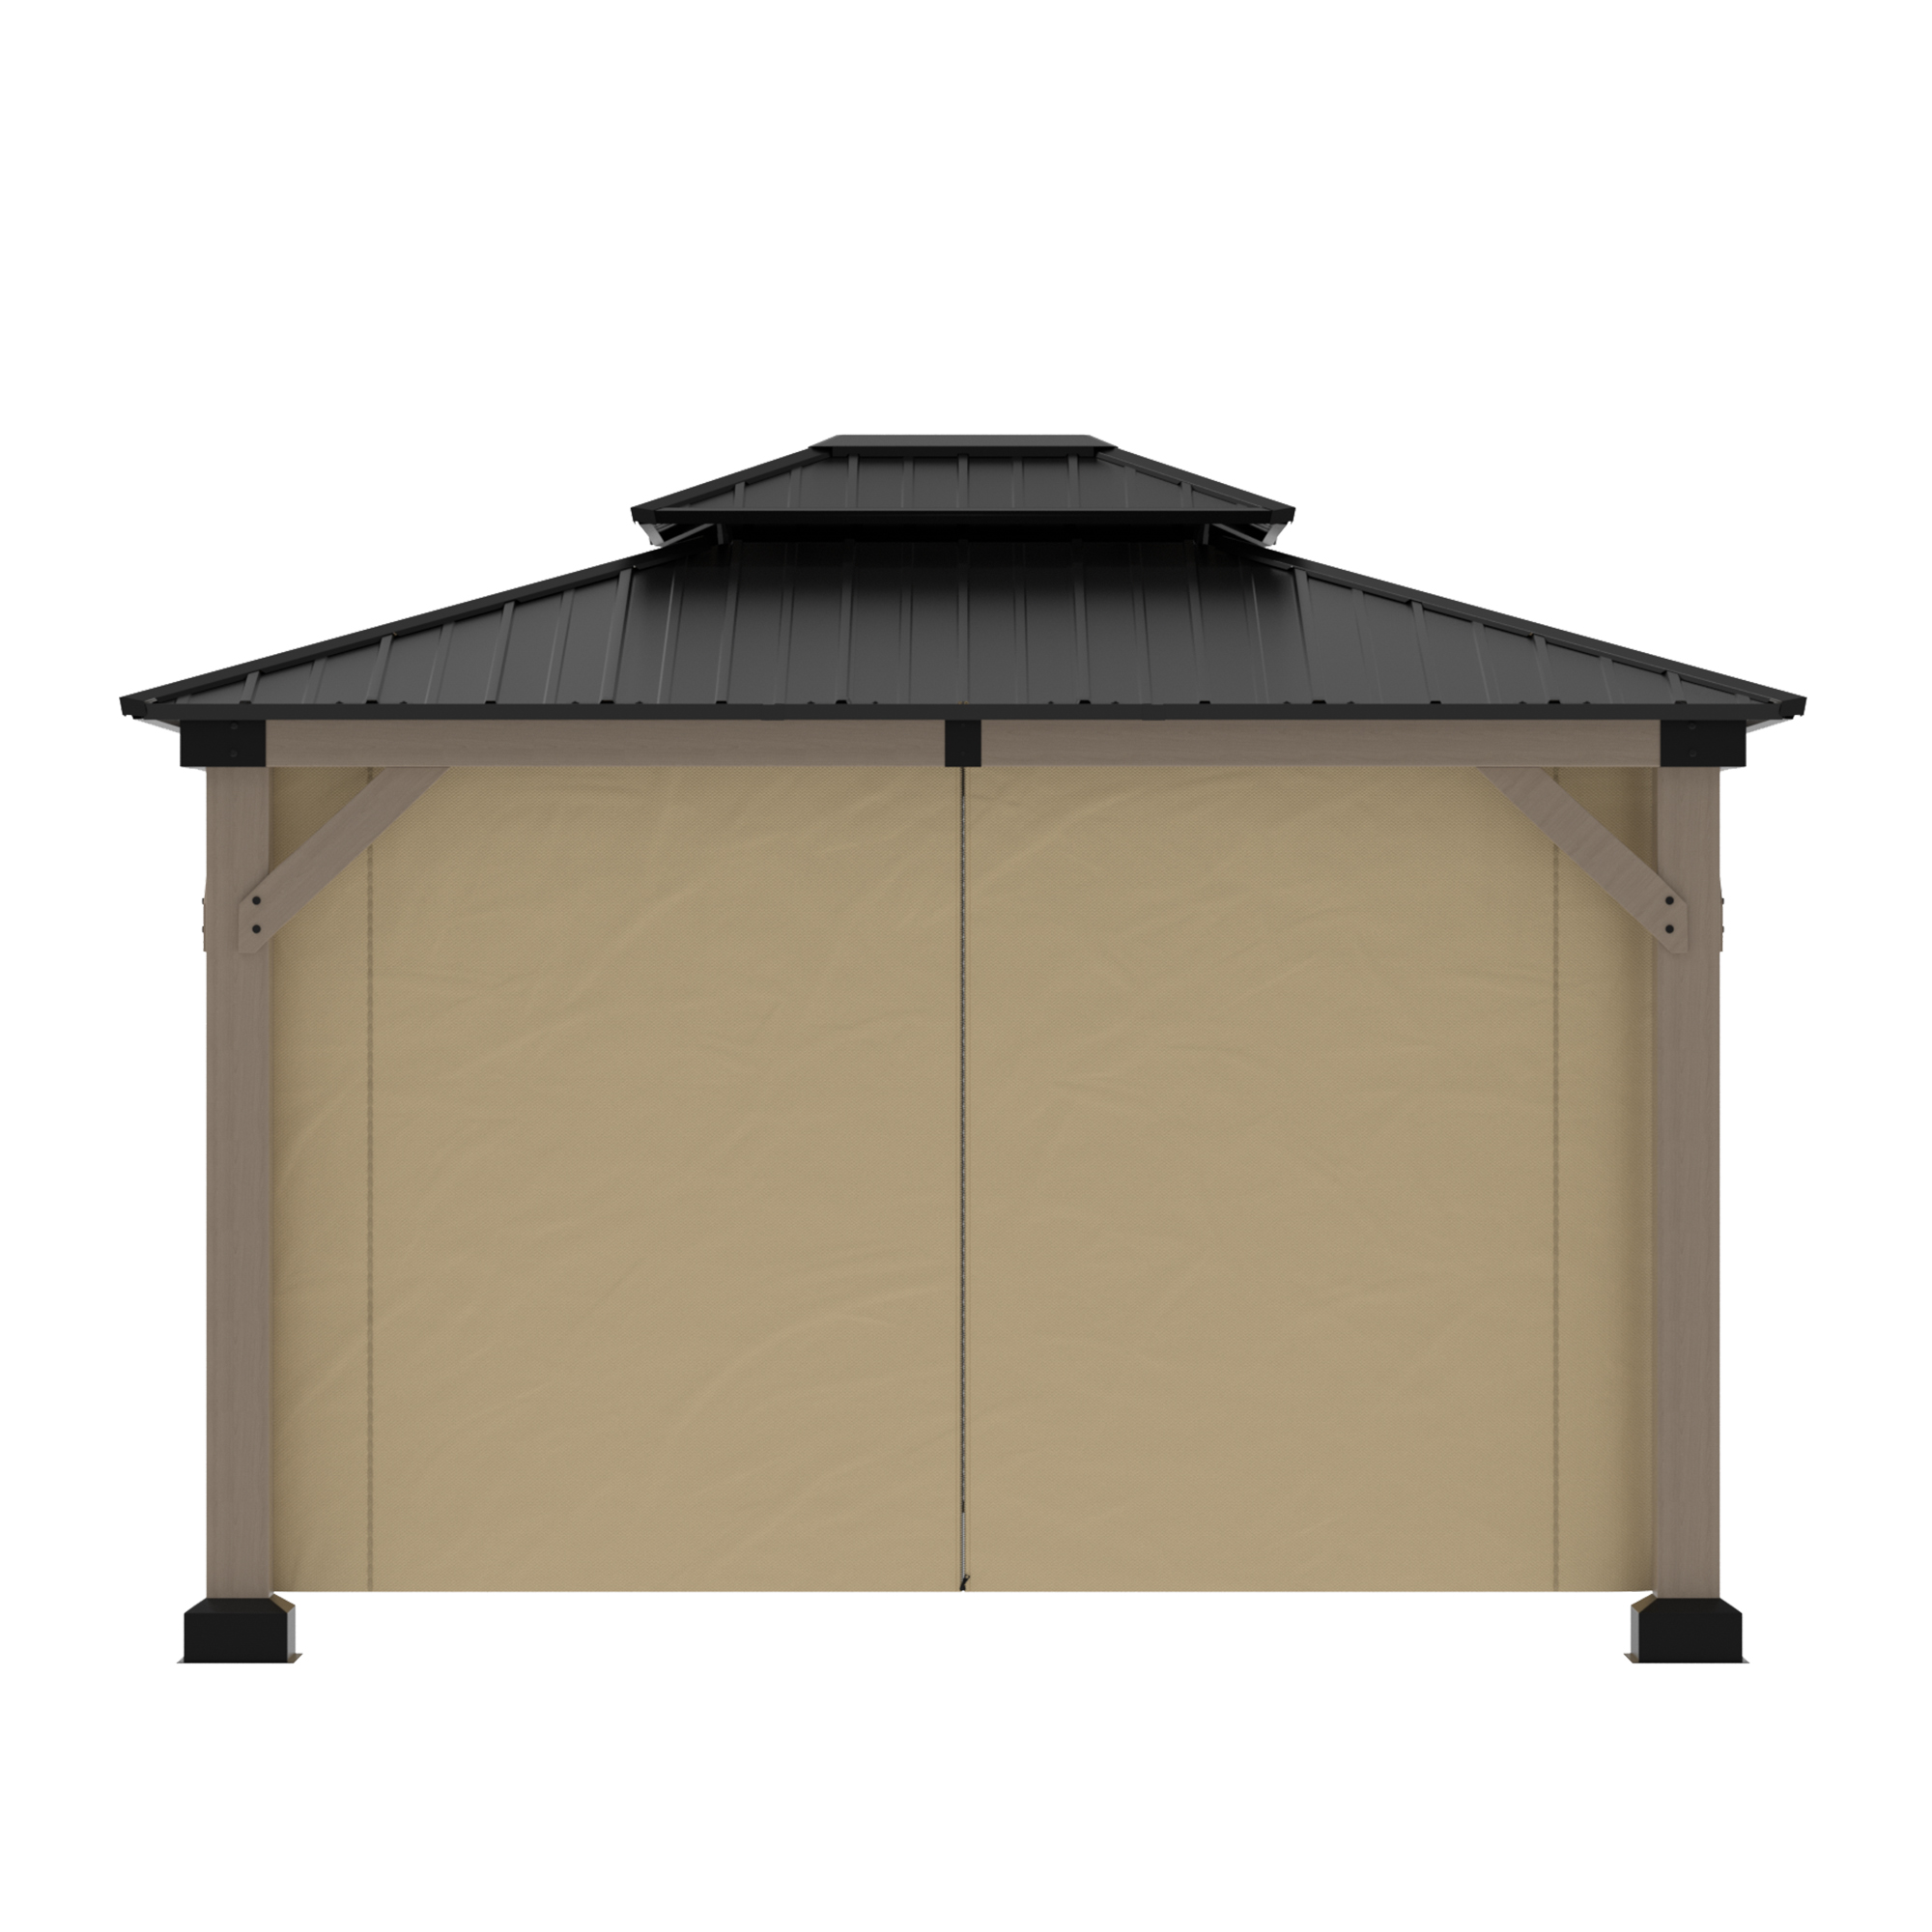 10 ft. x 12 ft. Outdoor Fir Solid Wood Frame Patio Gazebo Canopy Shelter with Galvanized Steel Hardtop Roof Pavilion-Mondawe